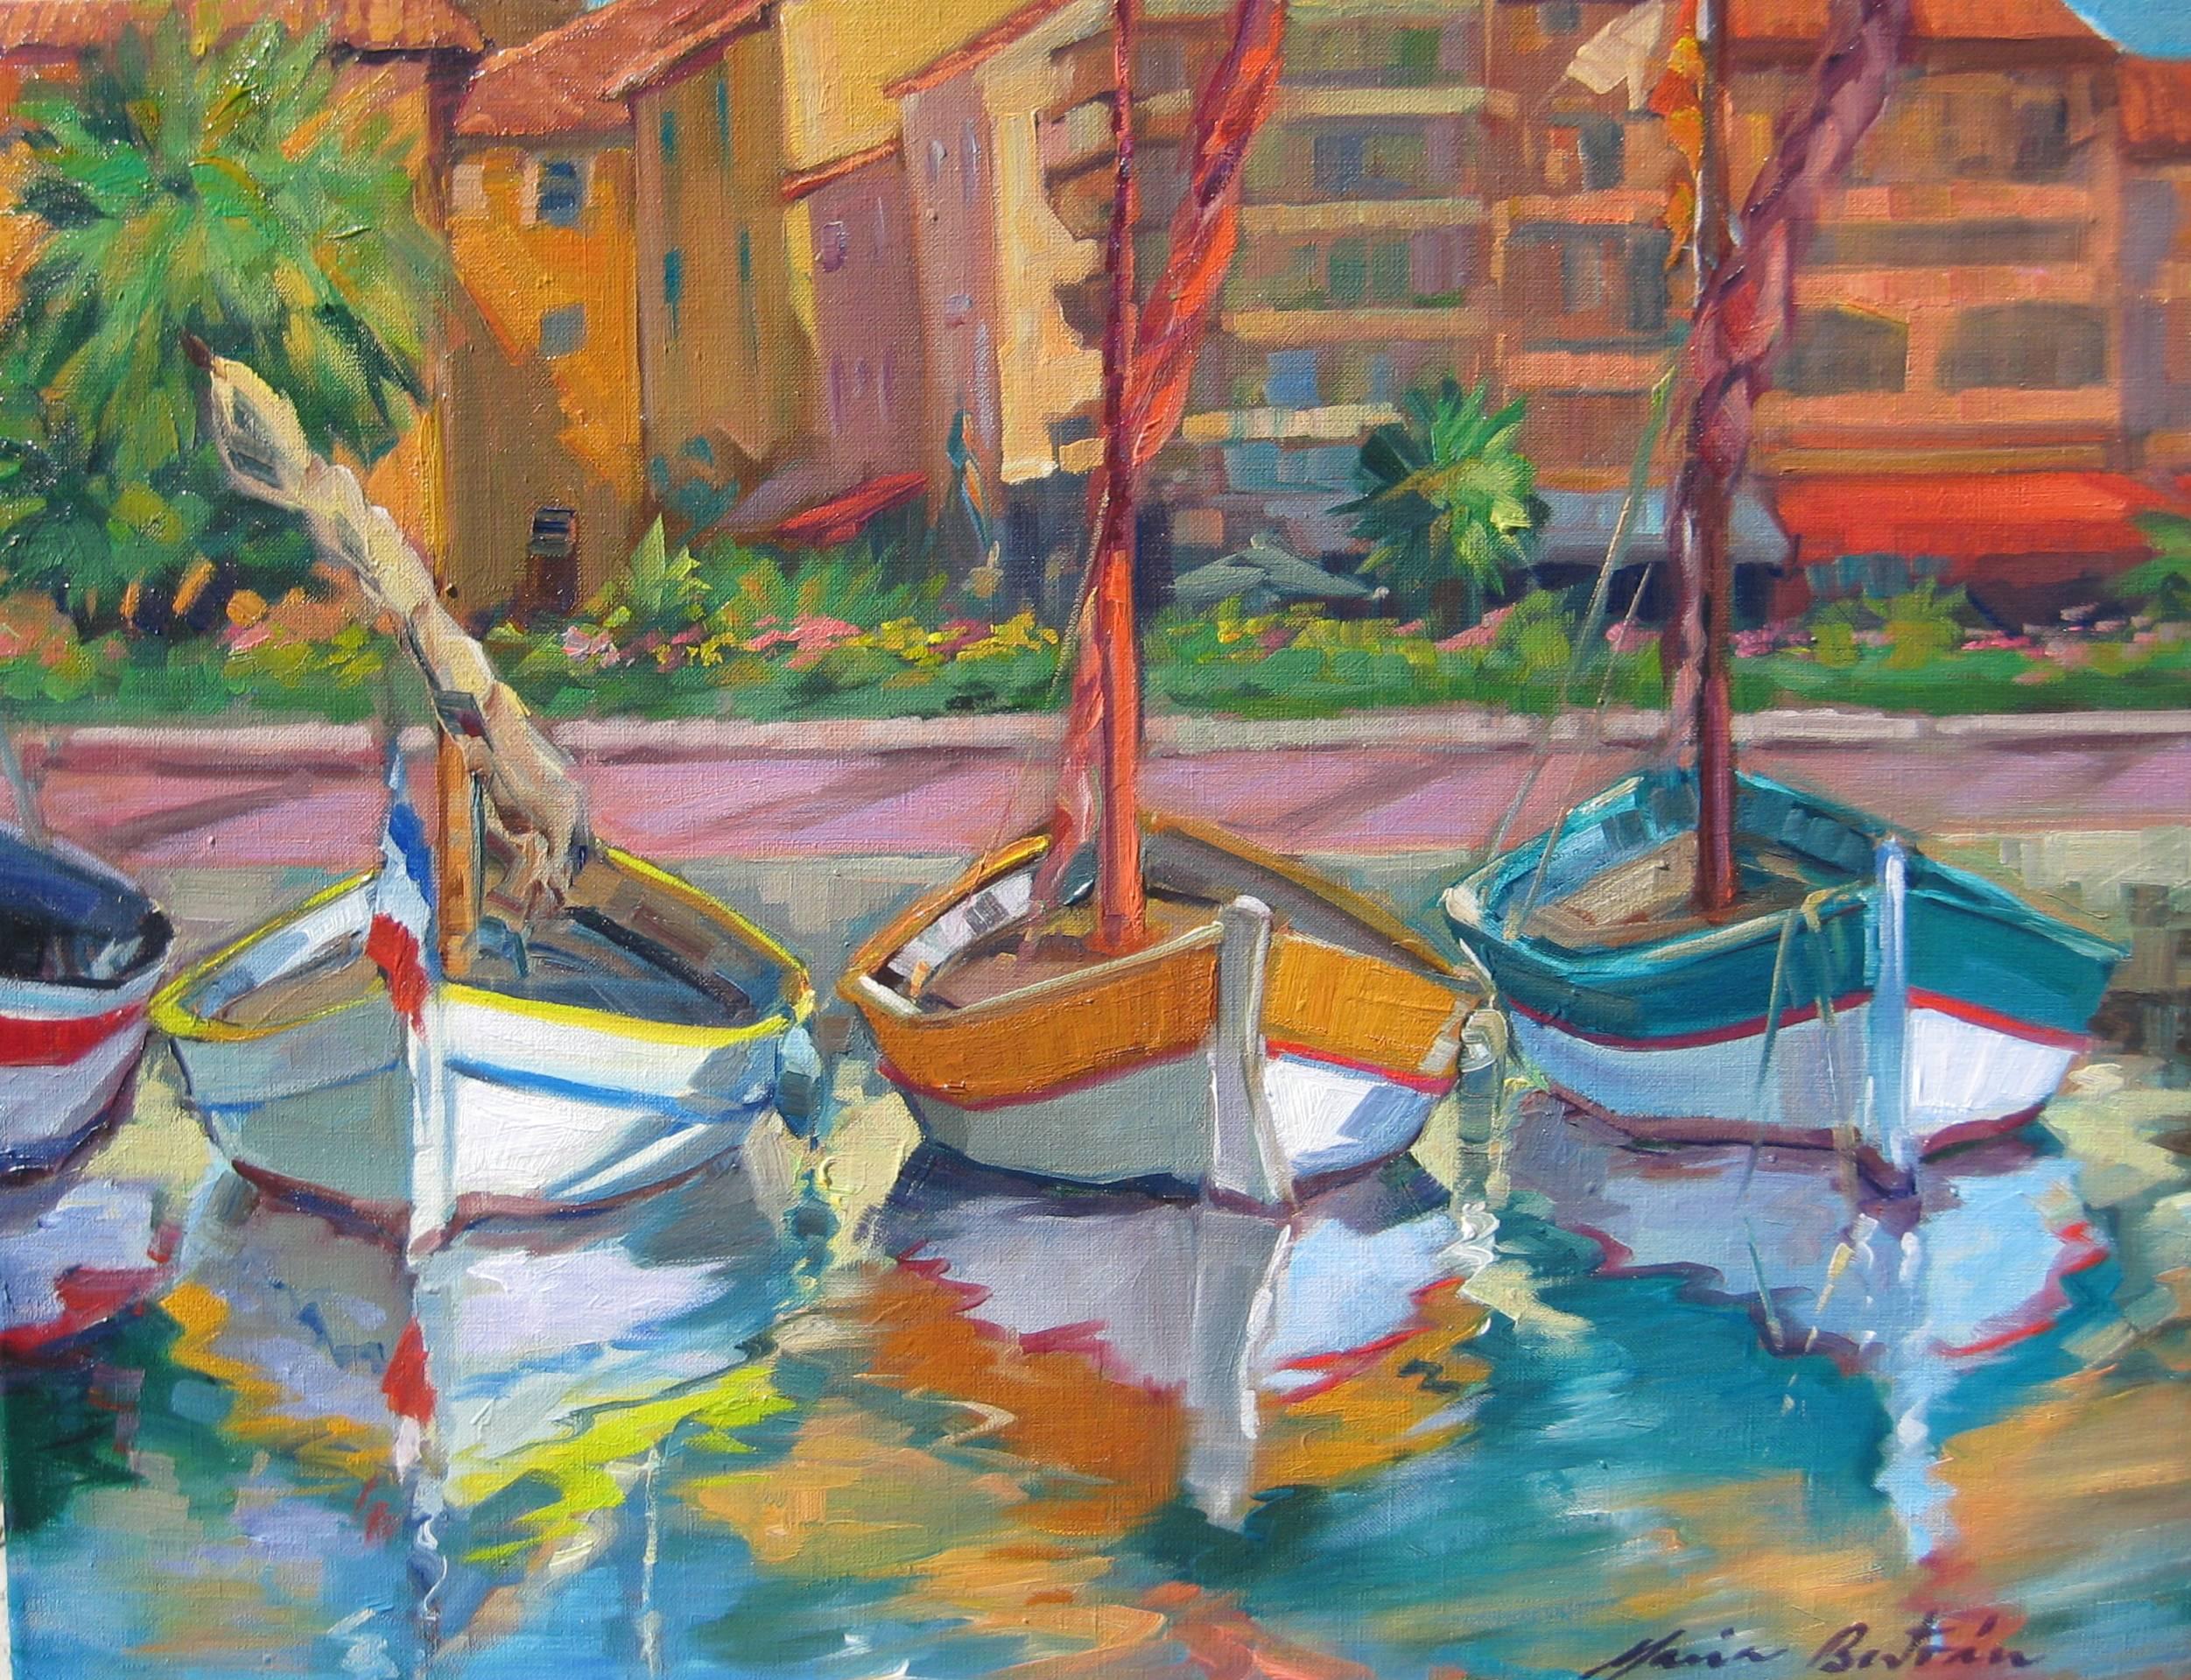 Maria Bertrán Landscape Painting - "Boats In Bandol, " Impressionist Oil Of French Riviera Boats by Maria Bertran